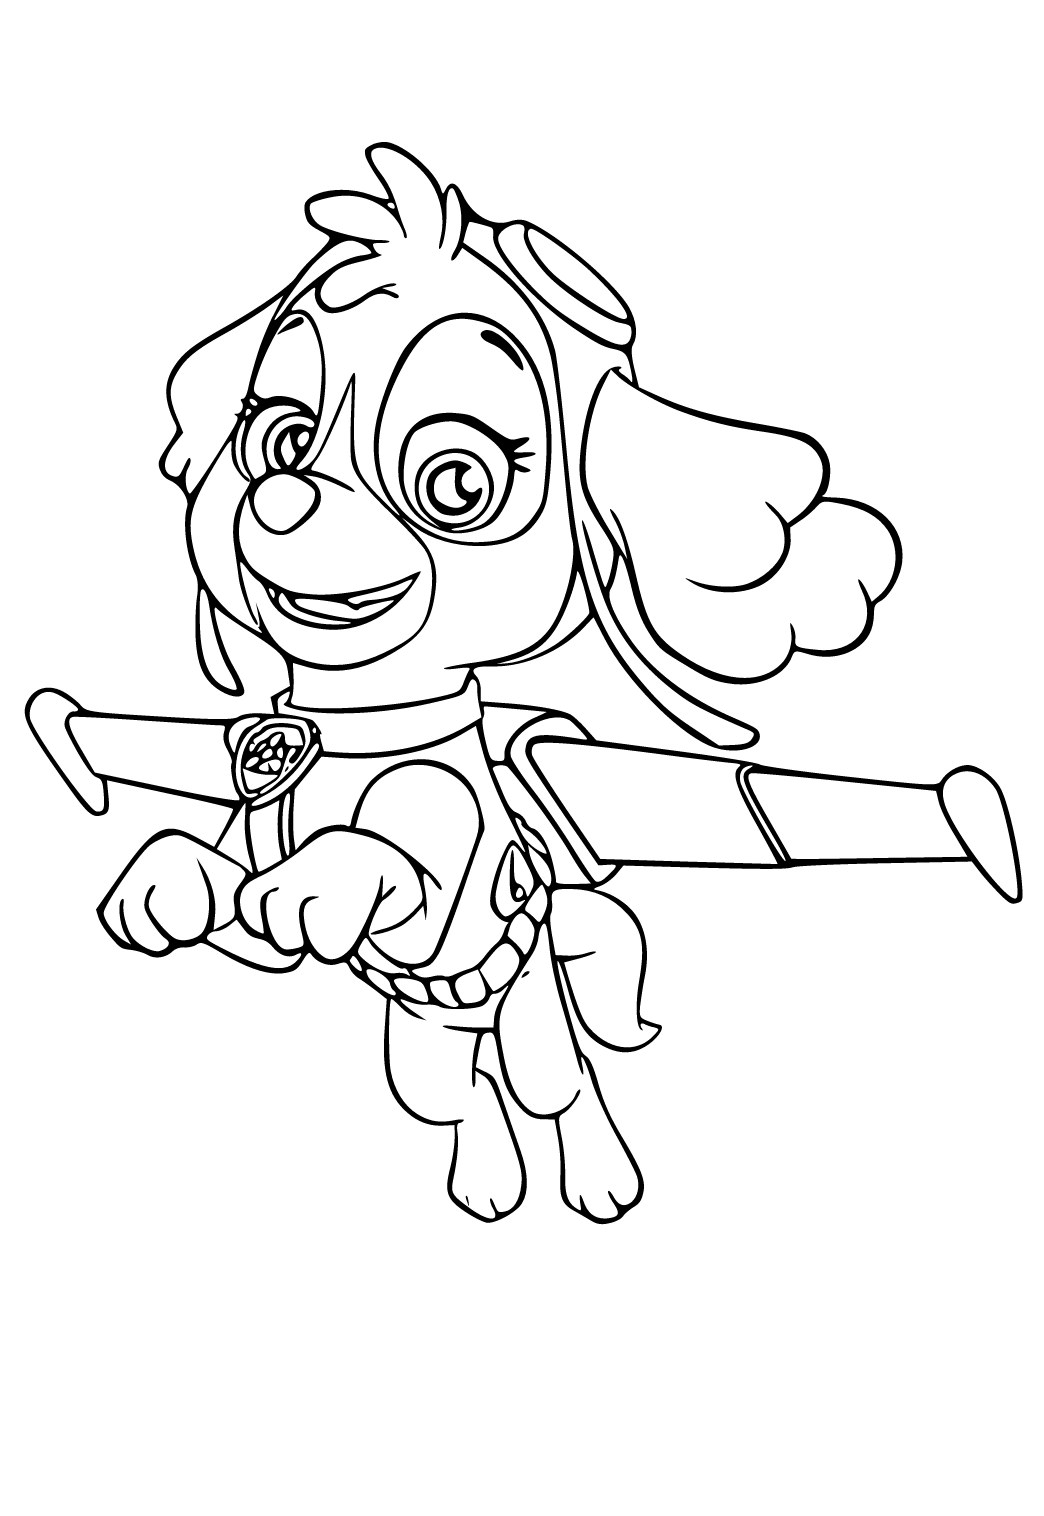 PAW Patrol Masks Printable Black and White - Get Coloring Pages